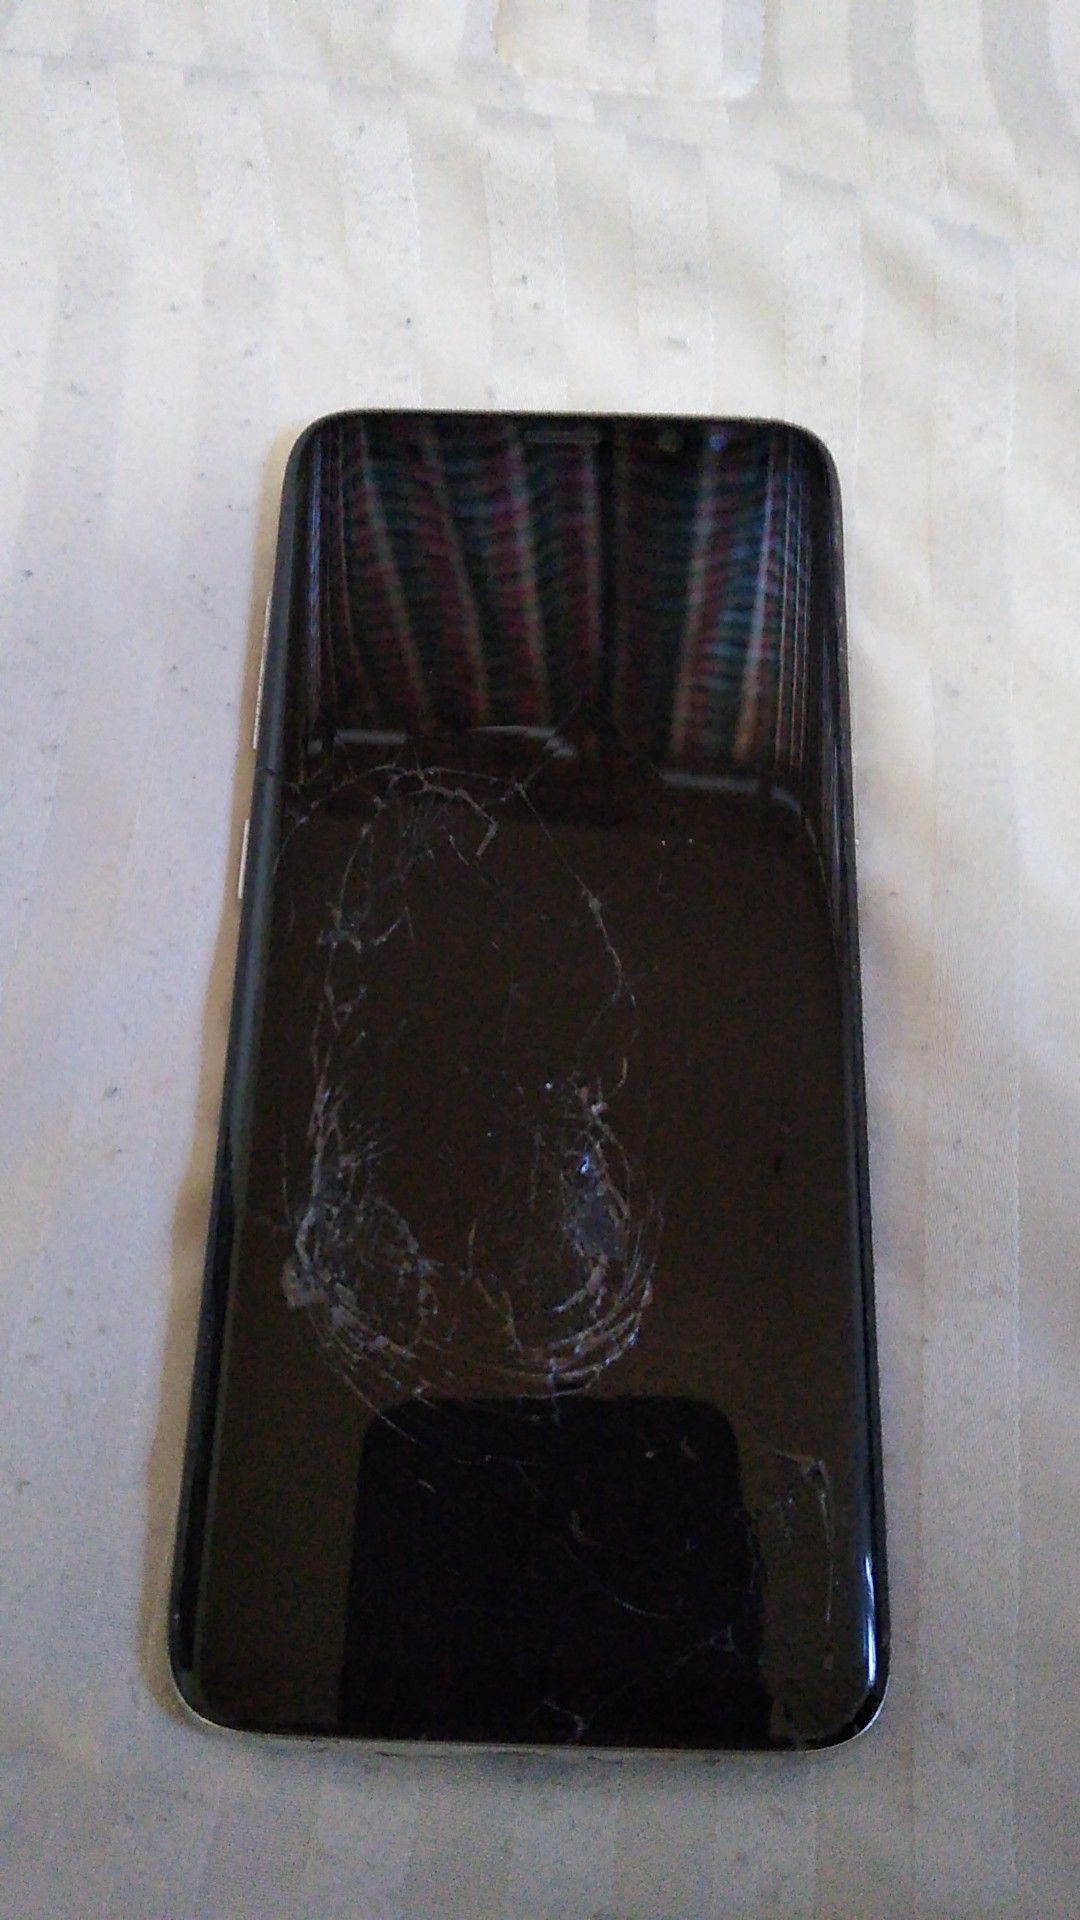 Samsung Galaxy s8 cracked but fully functional